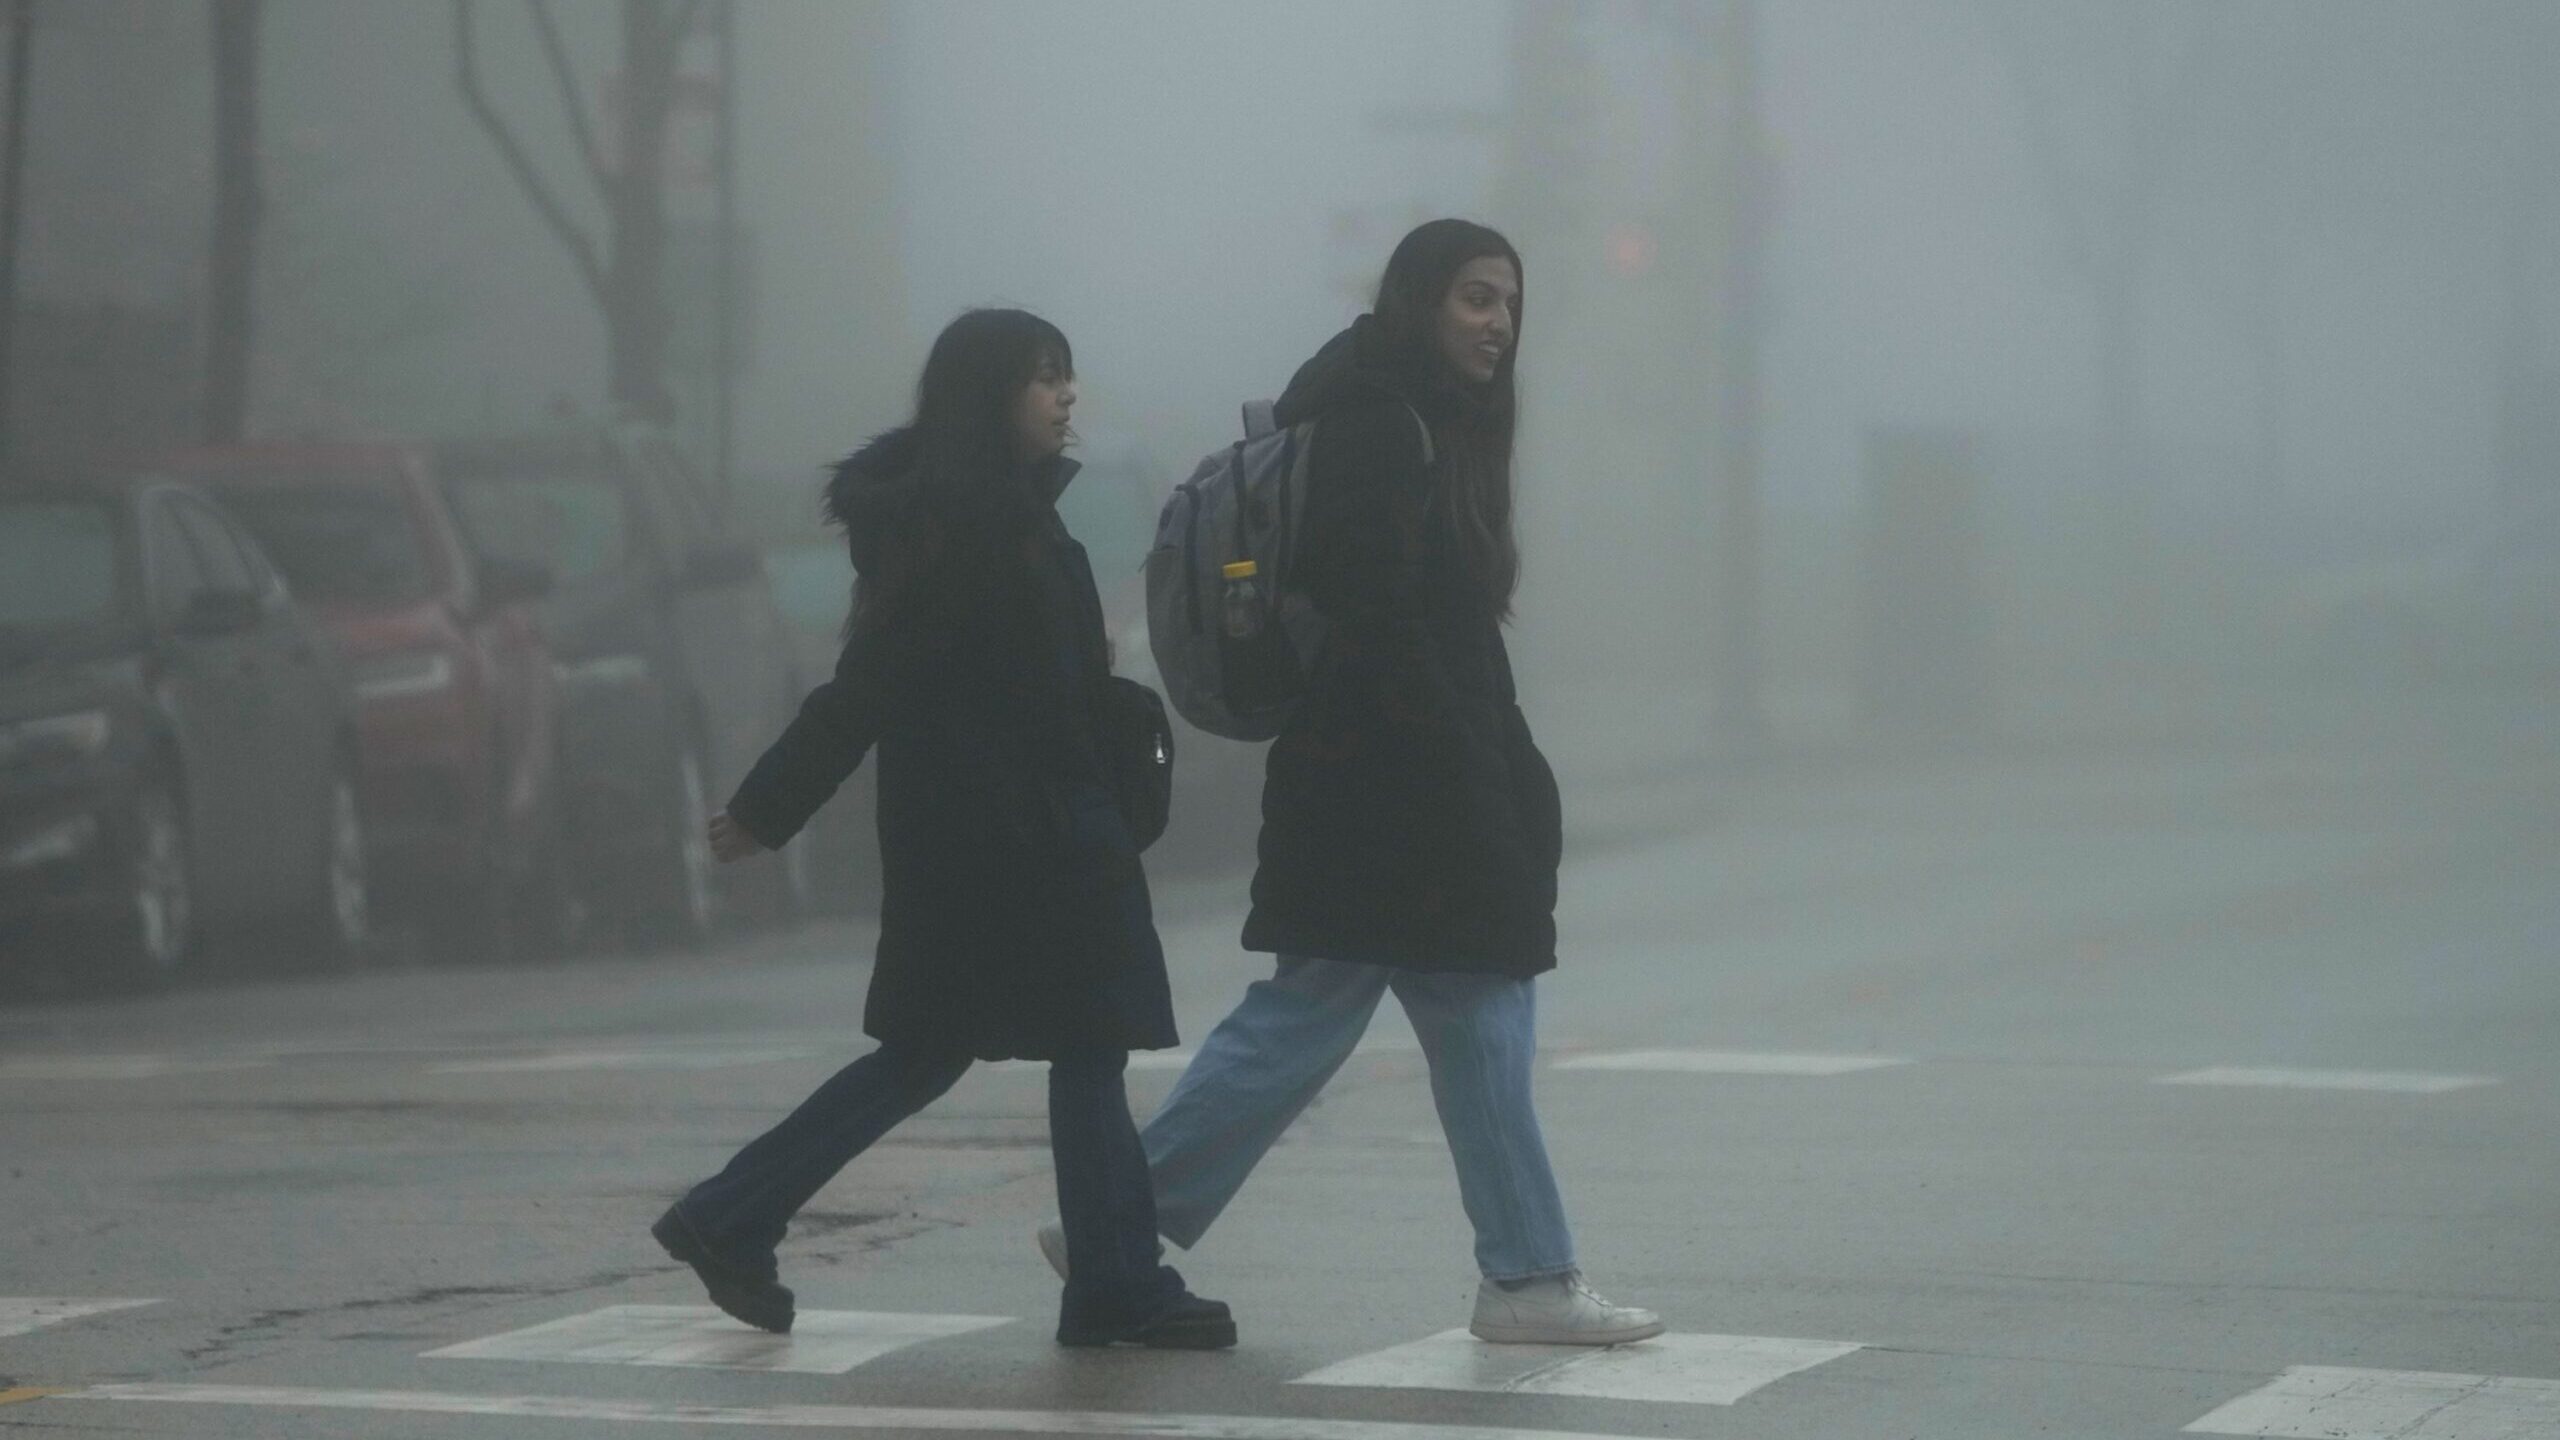 Pedestrians cross a street in the fog on Thursday, January 25, in Chicago....